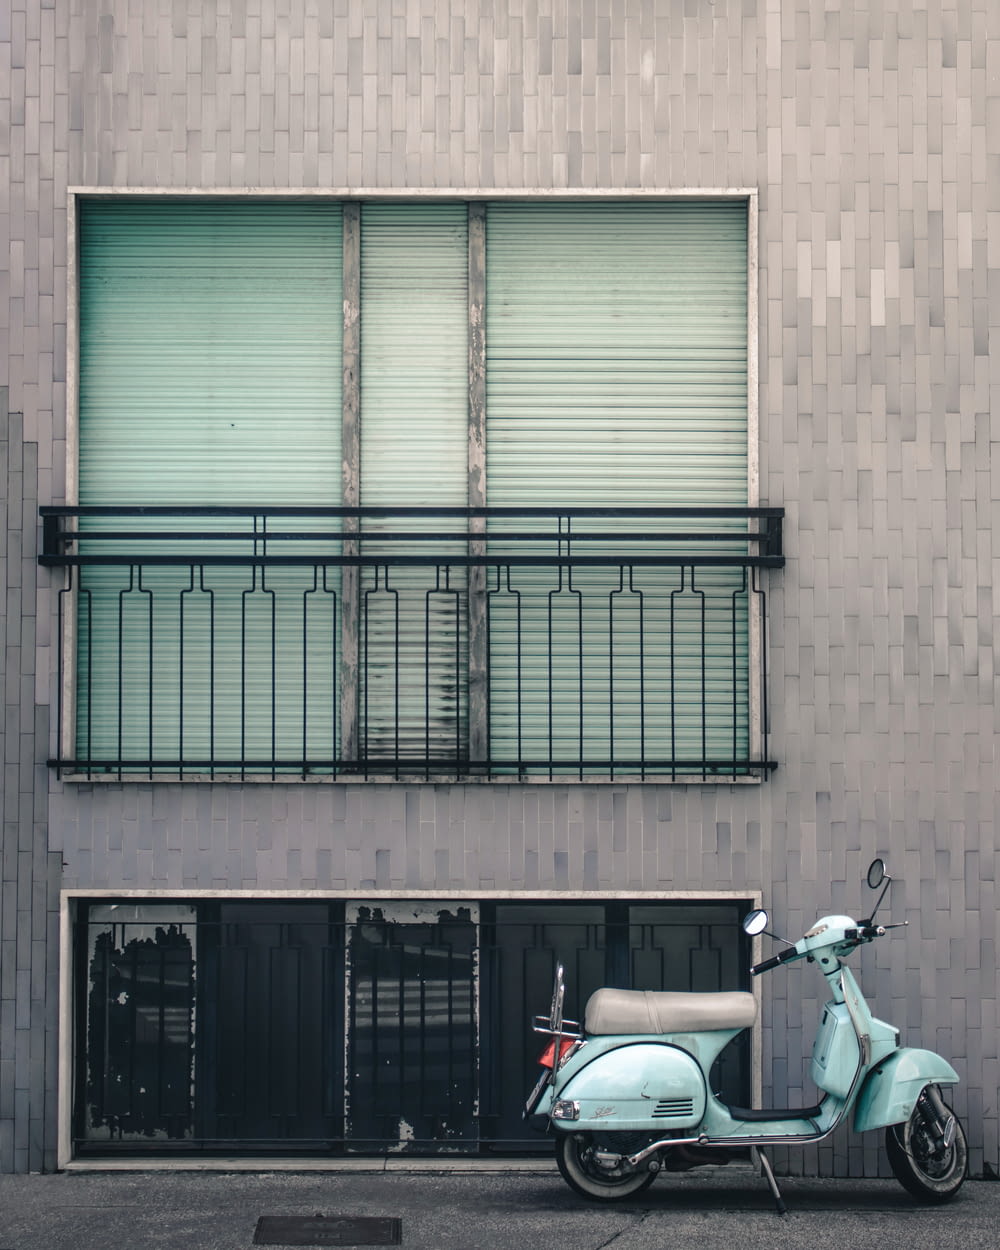 white and black motorcycle parked beside brown building